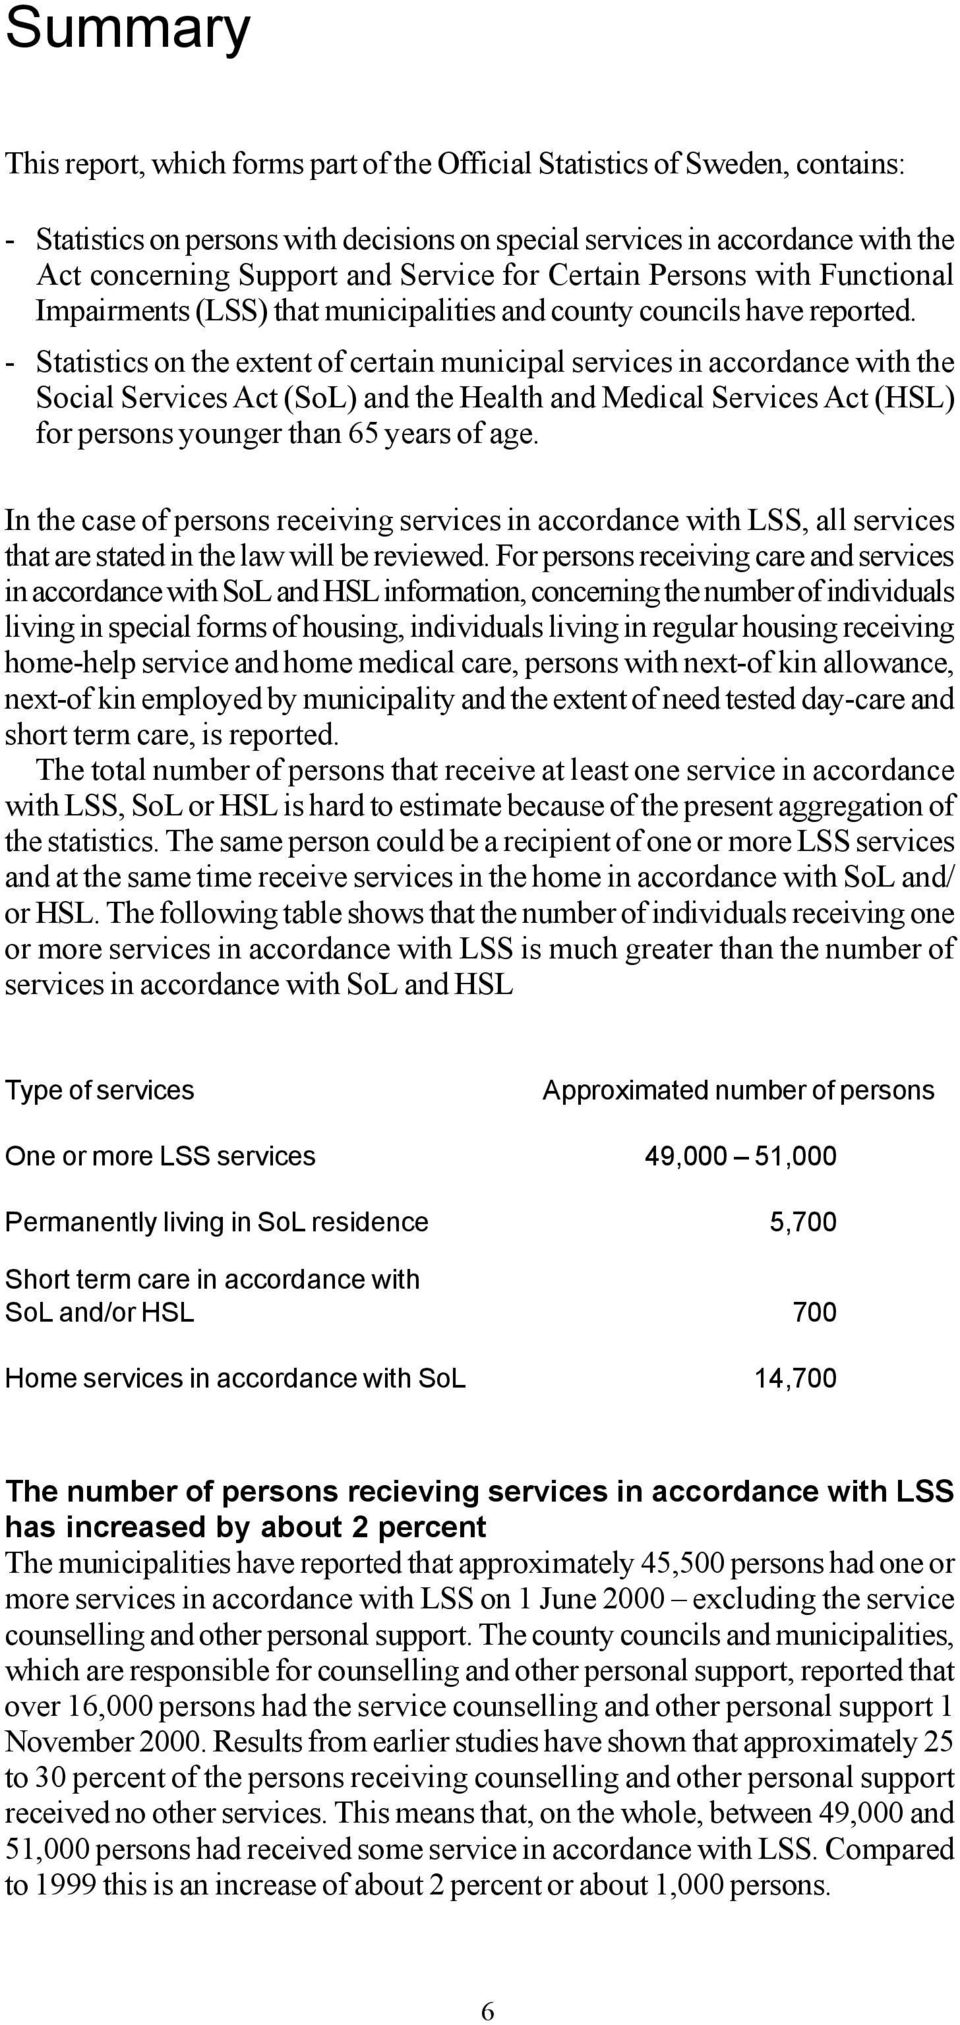 - Statistics on the extent of certain municipal services in accordance with the Social Services Act (SoL) and the Health and Medical Services Act (HSL) for persons younger than 65 years of age.